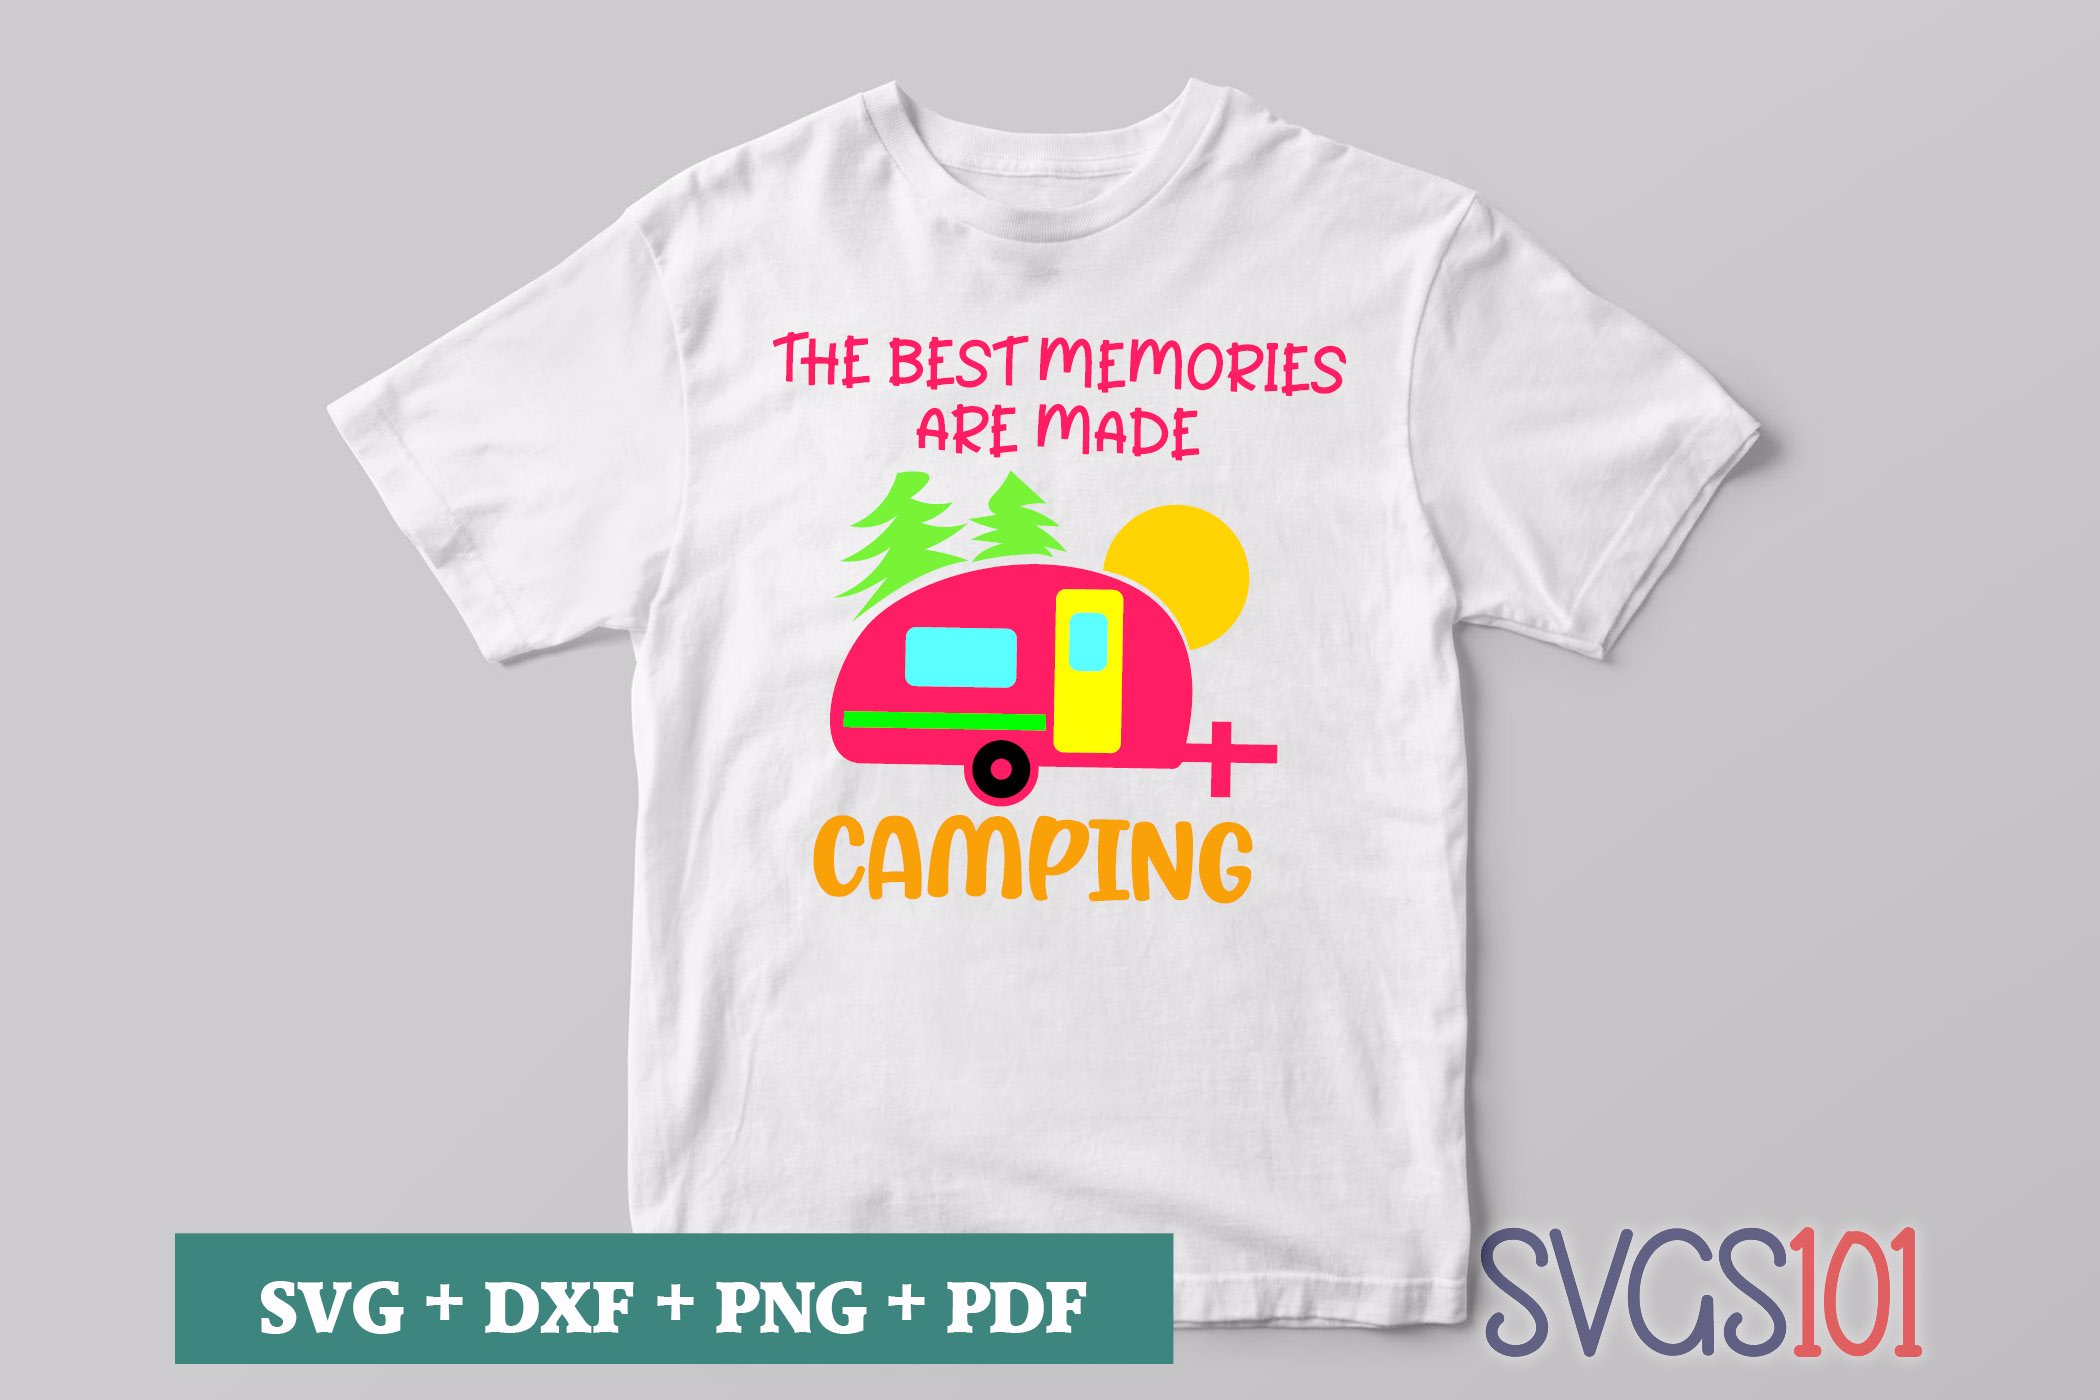 Download The Best Memories Are Made Camping SVG Cuttable file - DXF ...